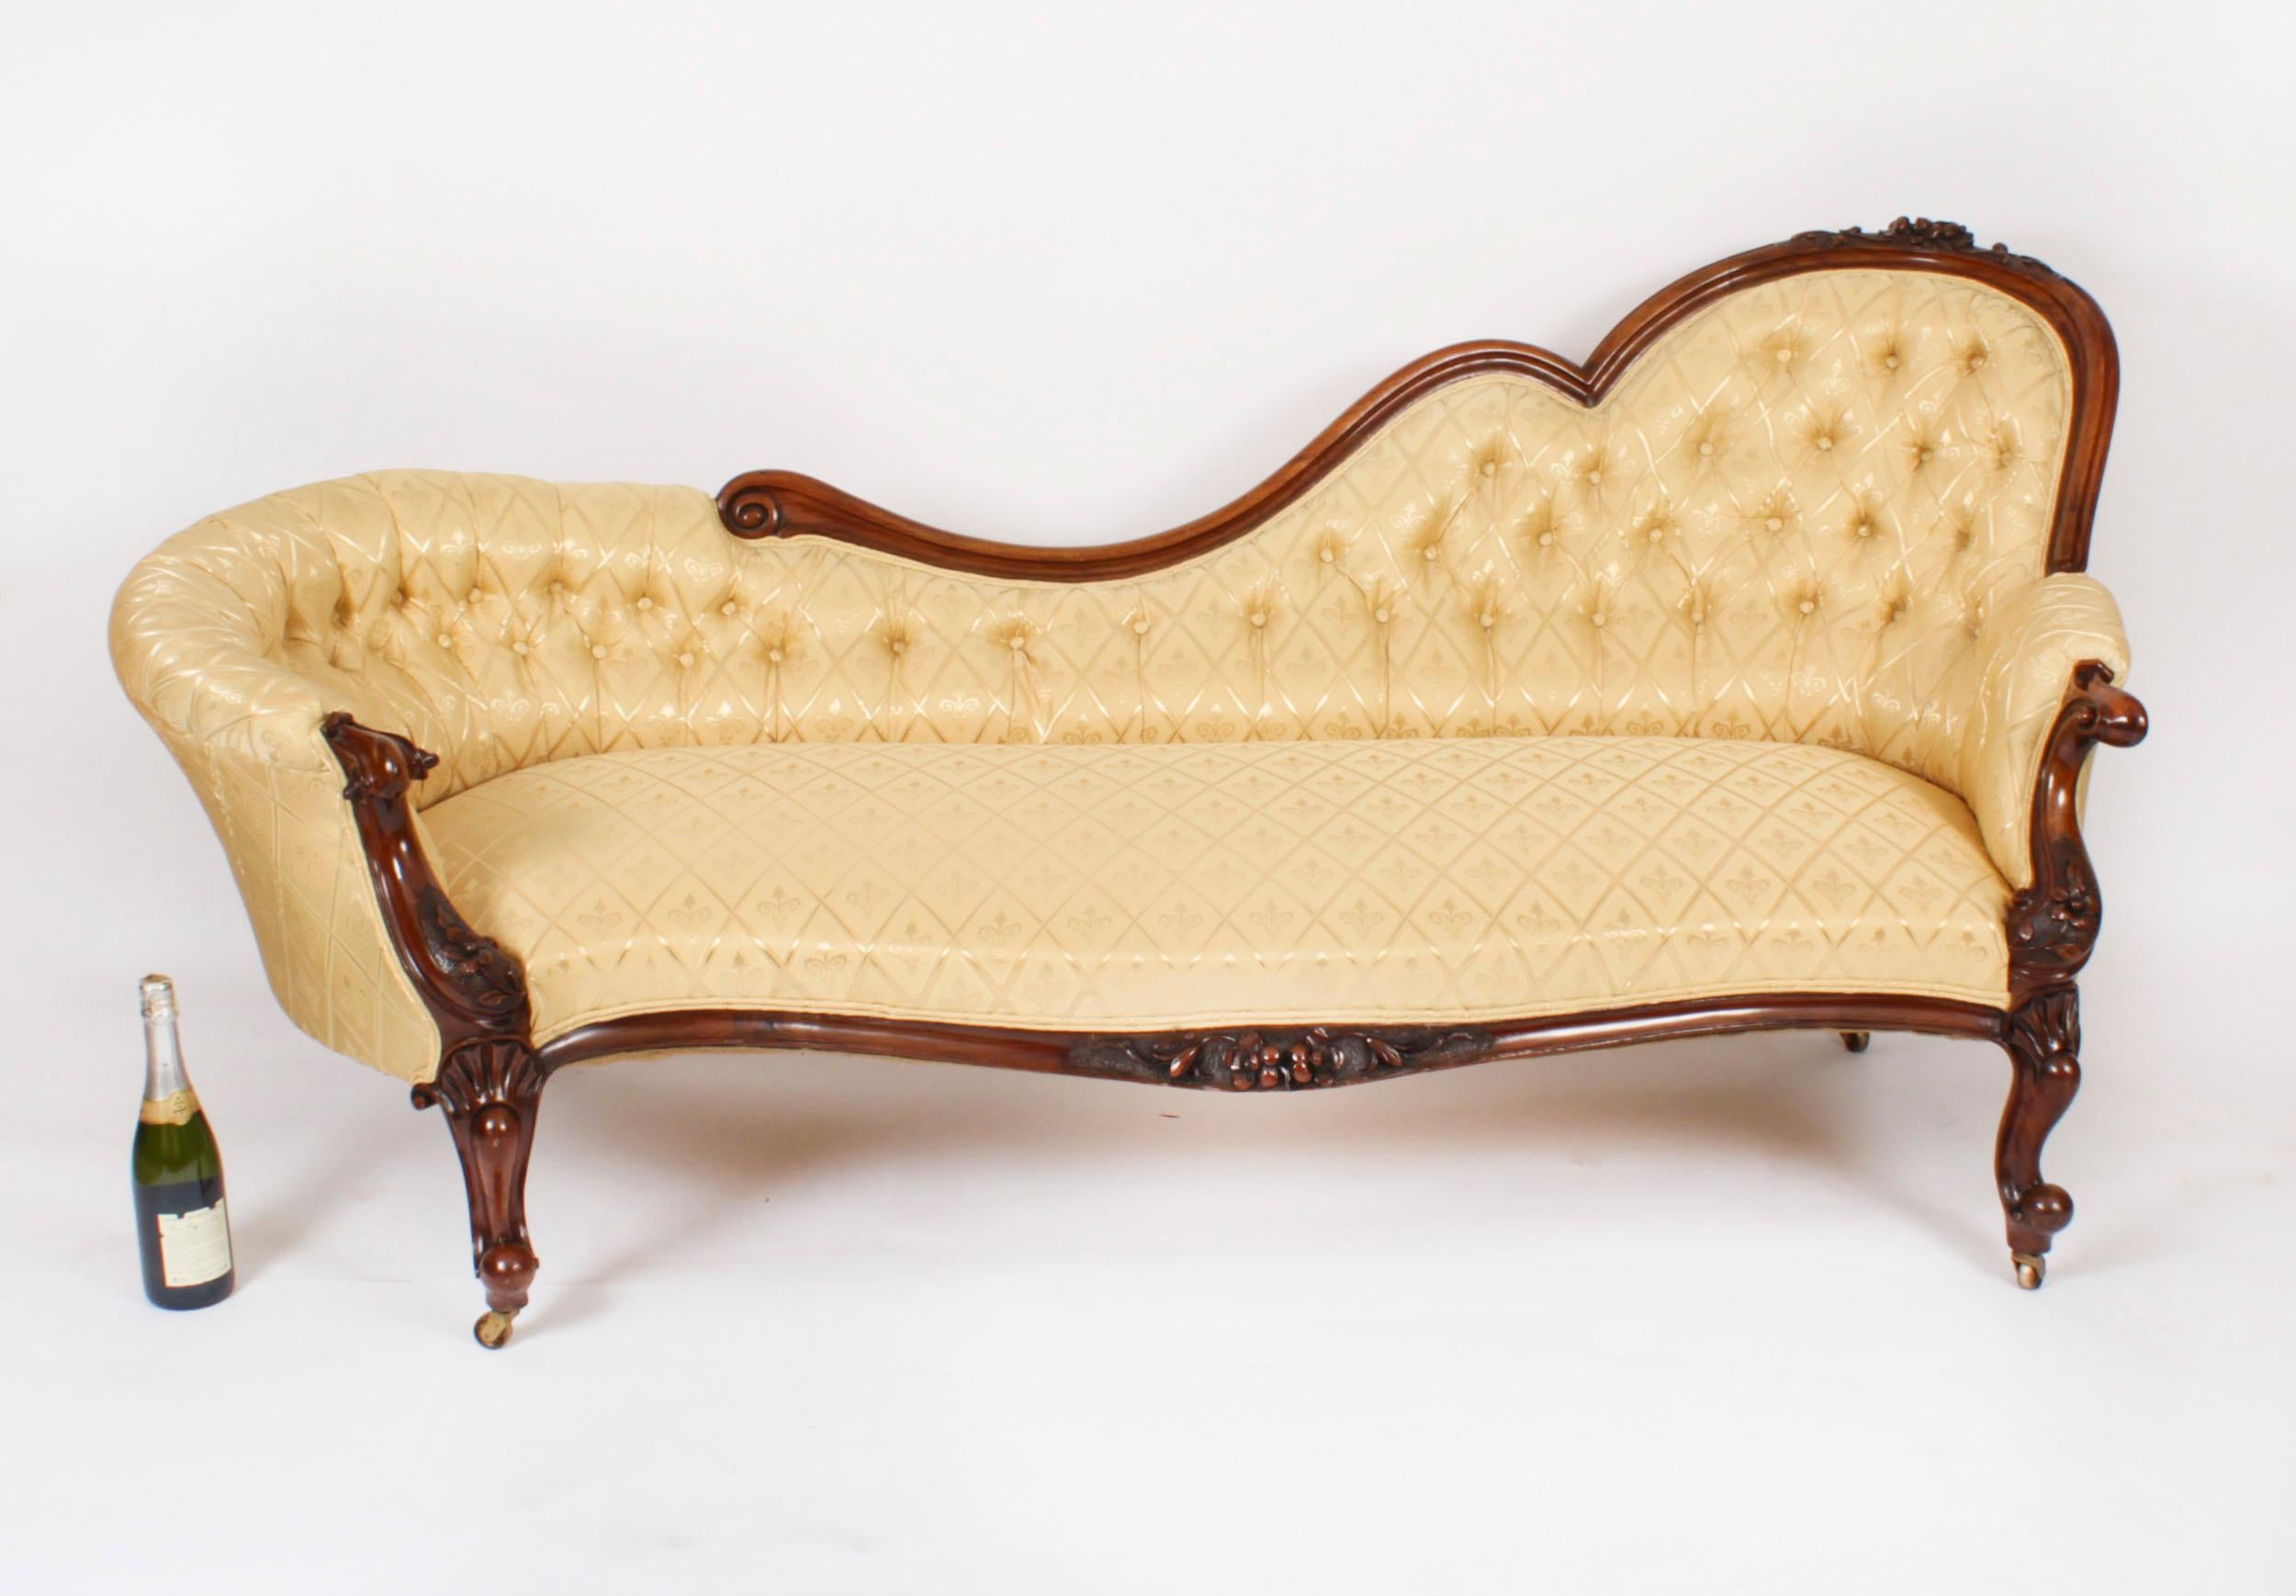 Antique Victorian Walnut Sofa Chaise Longue Settee 19th Century For Sale 13